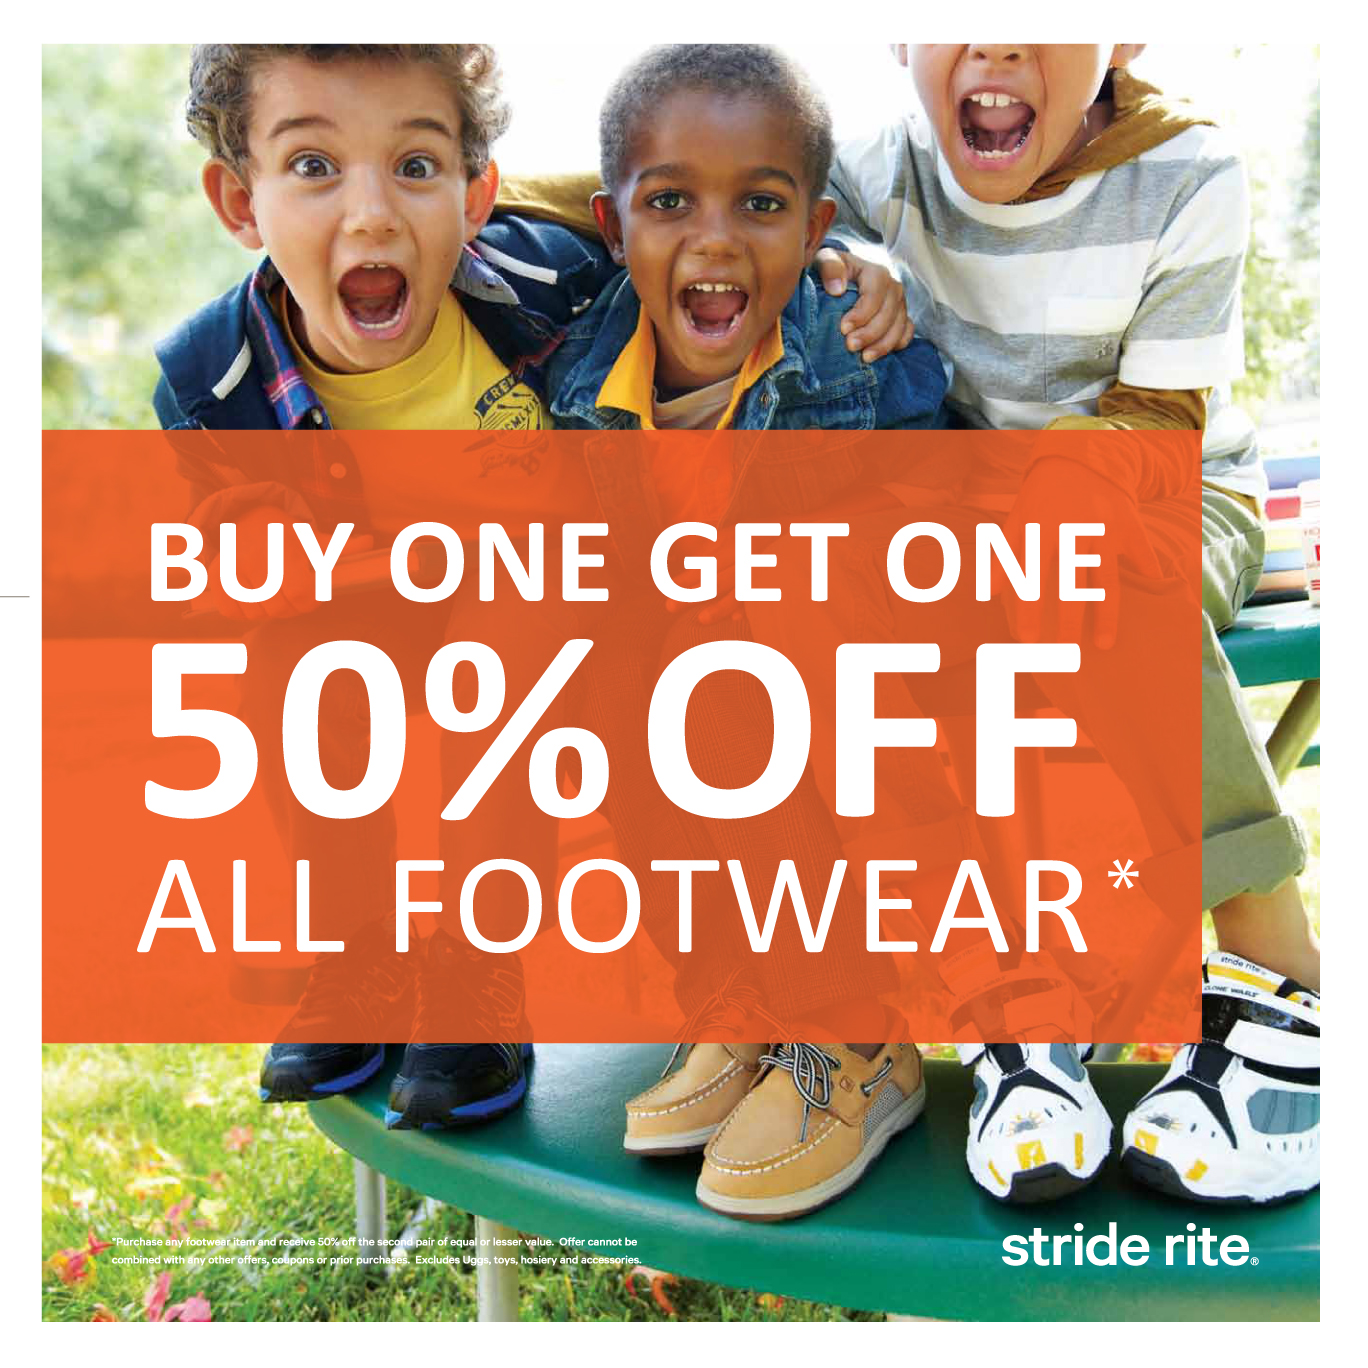 Stride Rite Buy One Get one Half Off Sale + Enter to Win a Free Pair